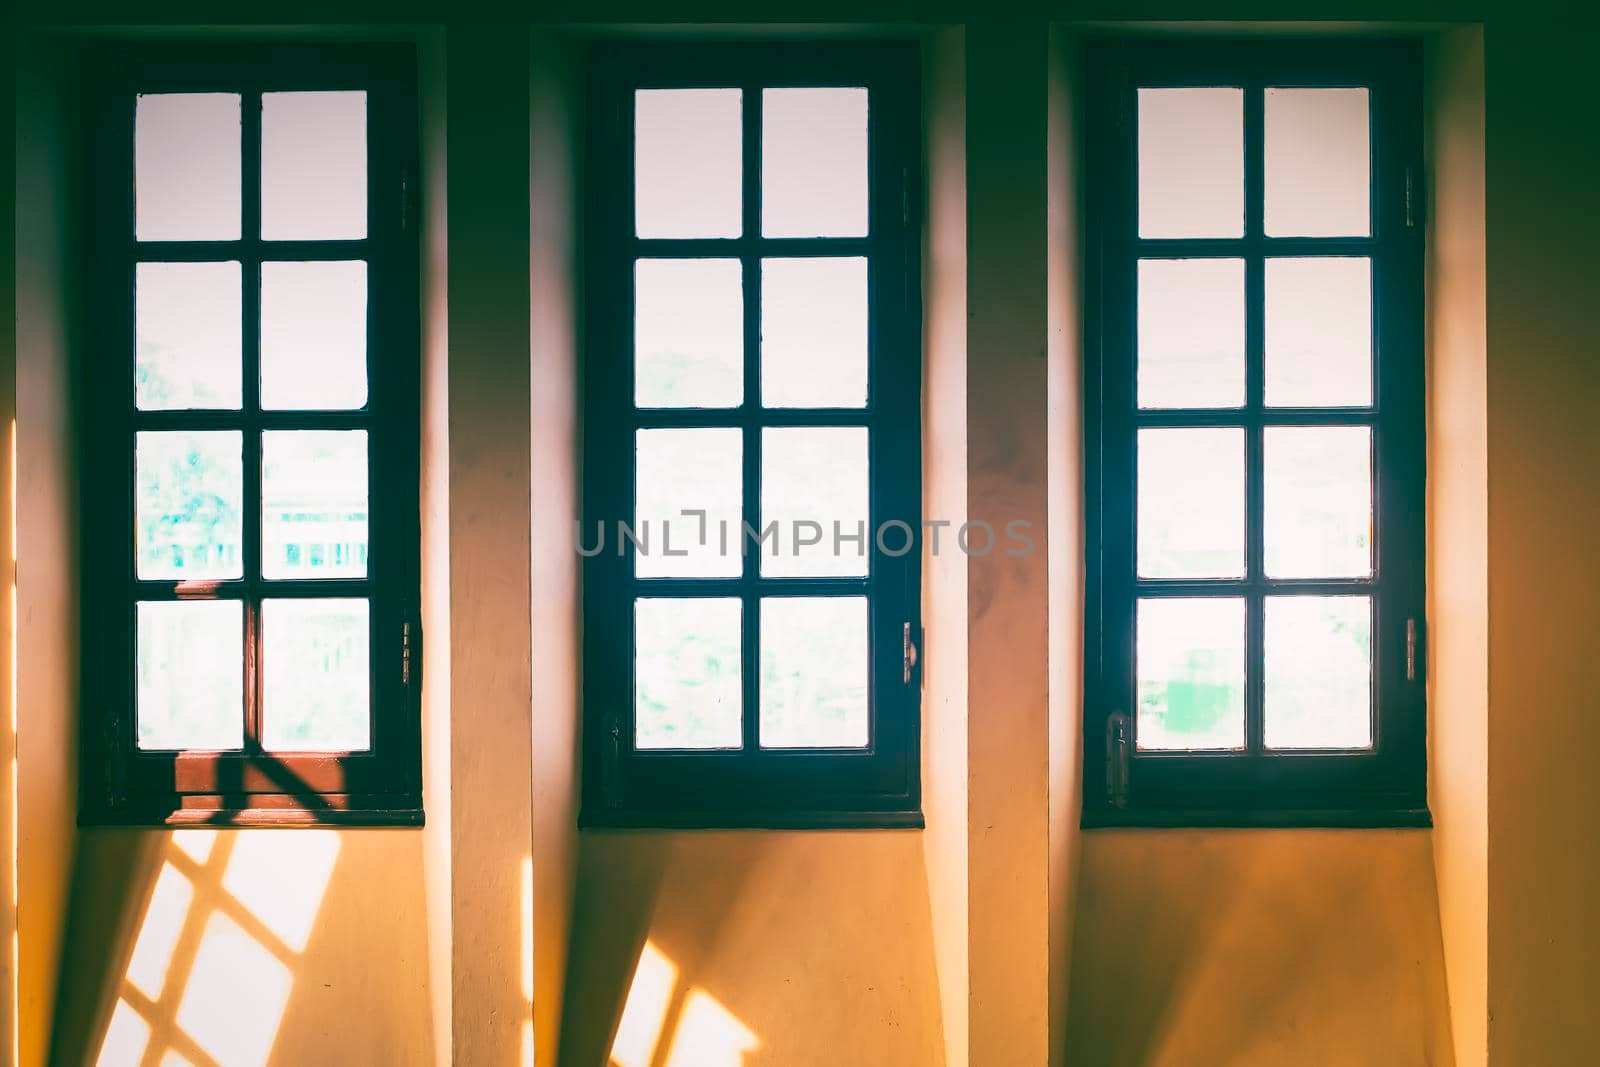 Old translucent glass with brown wooden frame window on white tone wall background